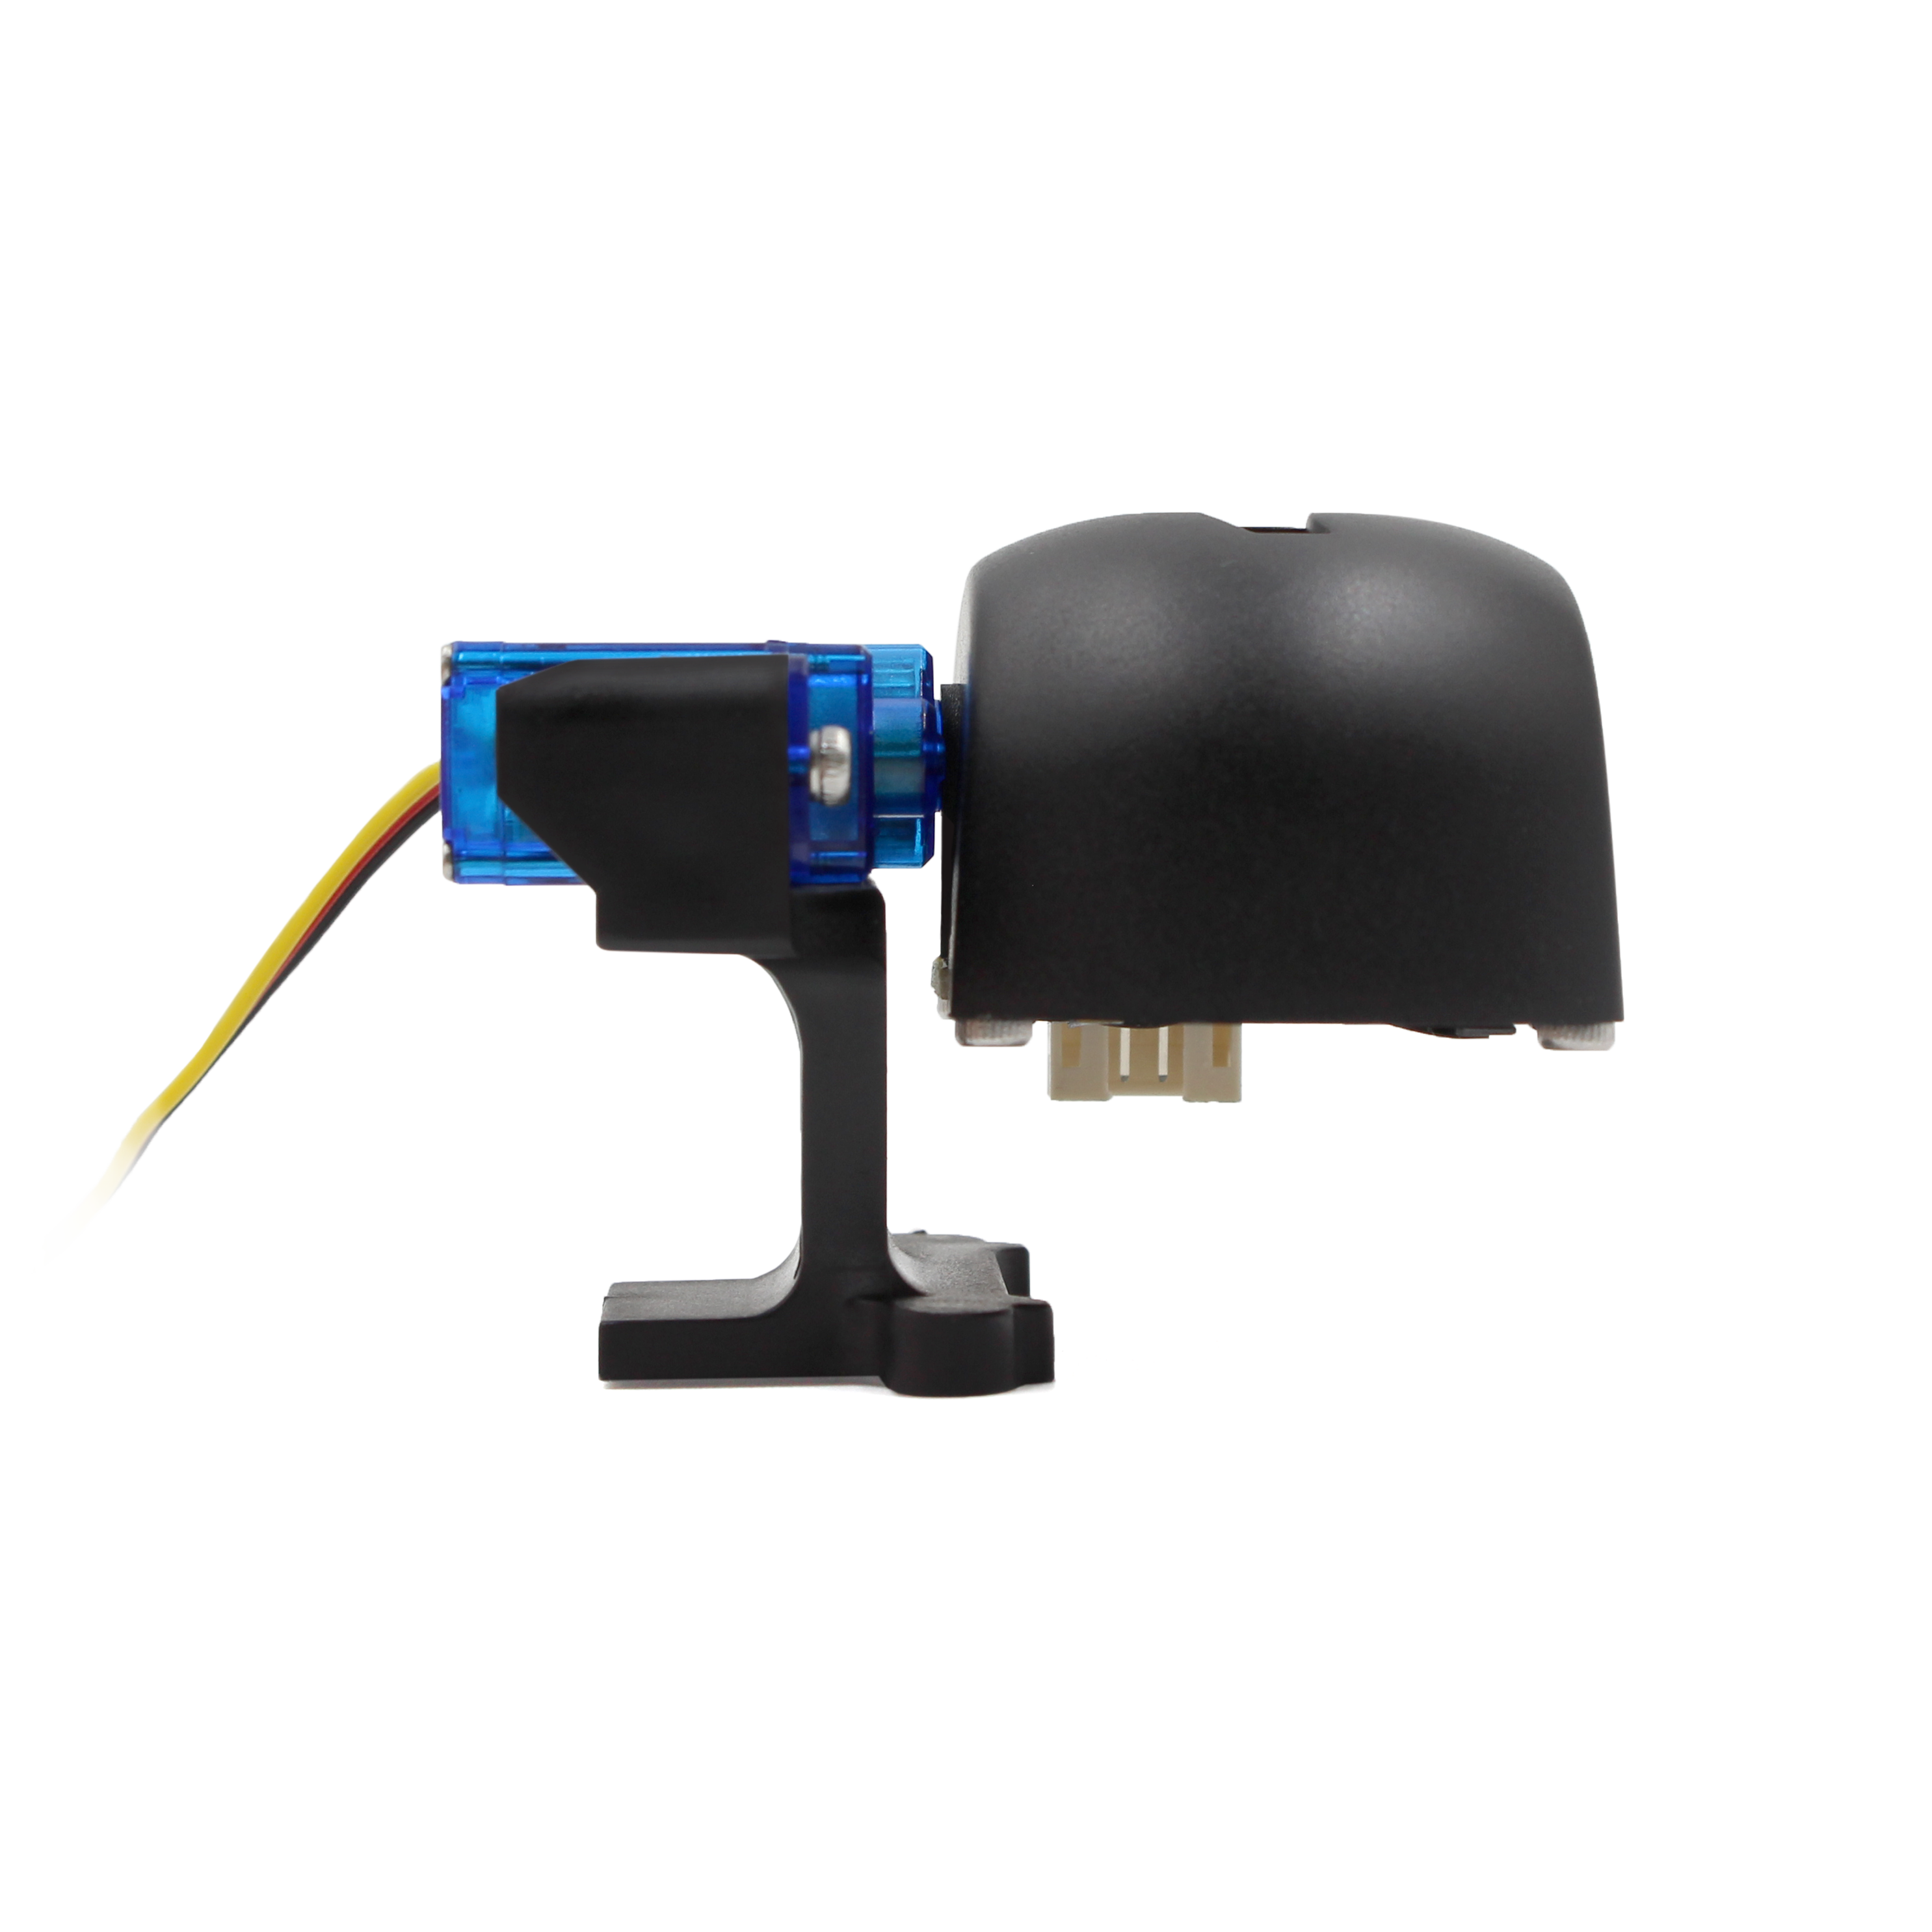  Mount for USB Camera